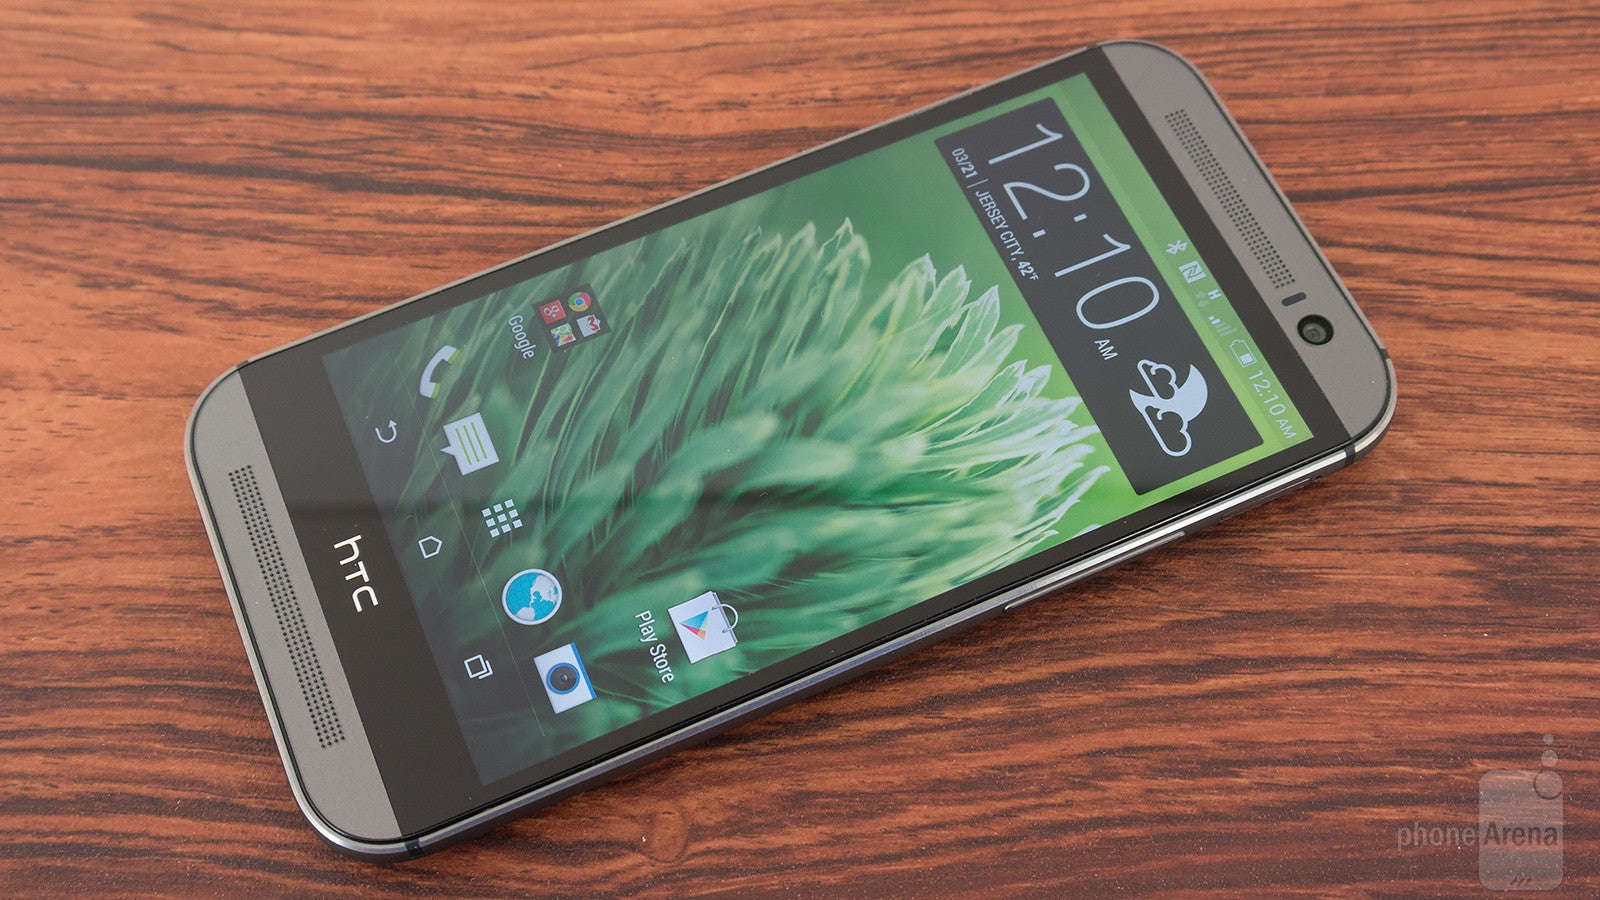 HTC One M8 Dual SIM officially announced, will be launched next week in select markets